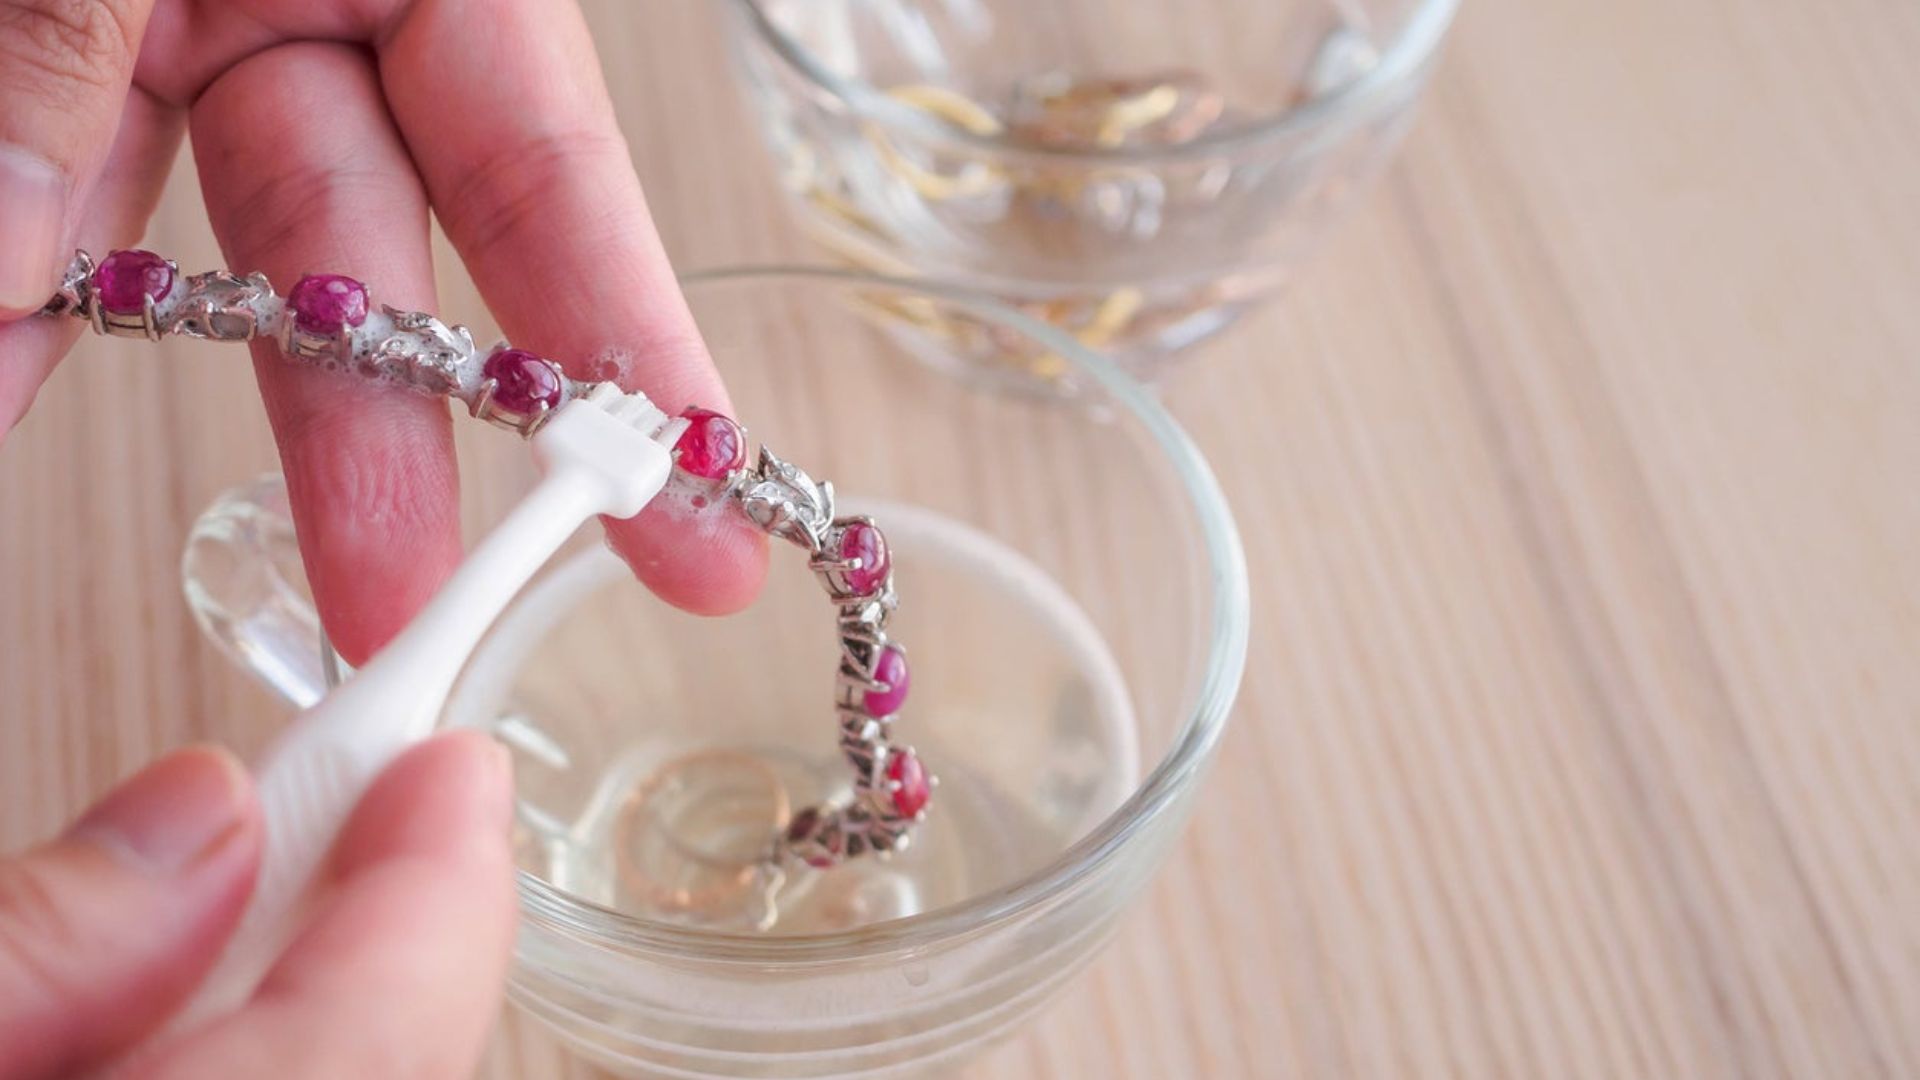 Cleaning Your Jewelry At Home